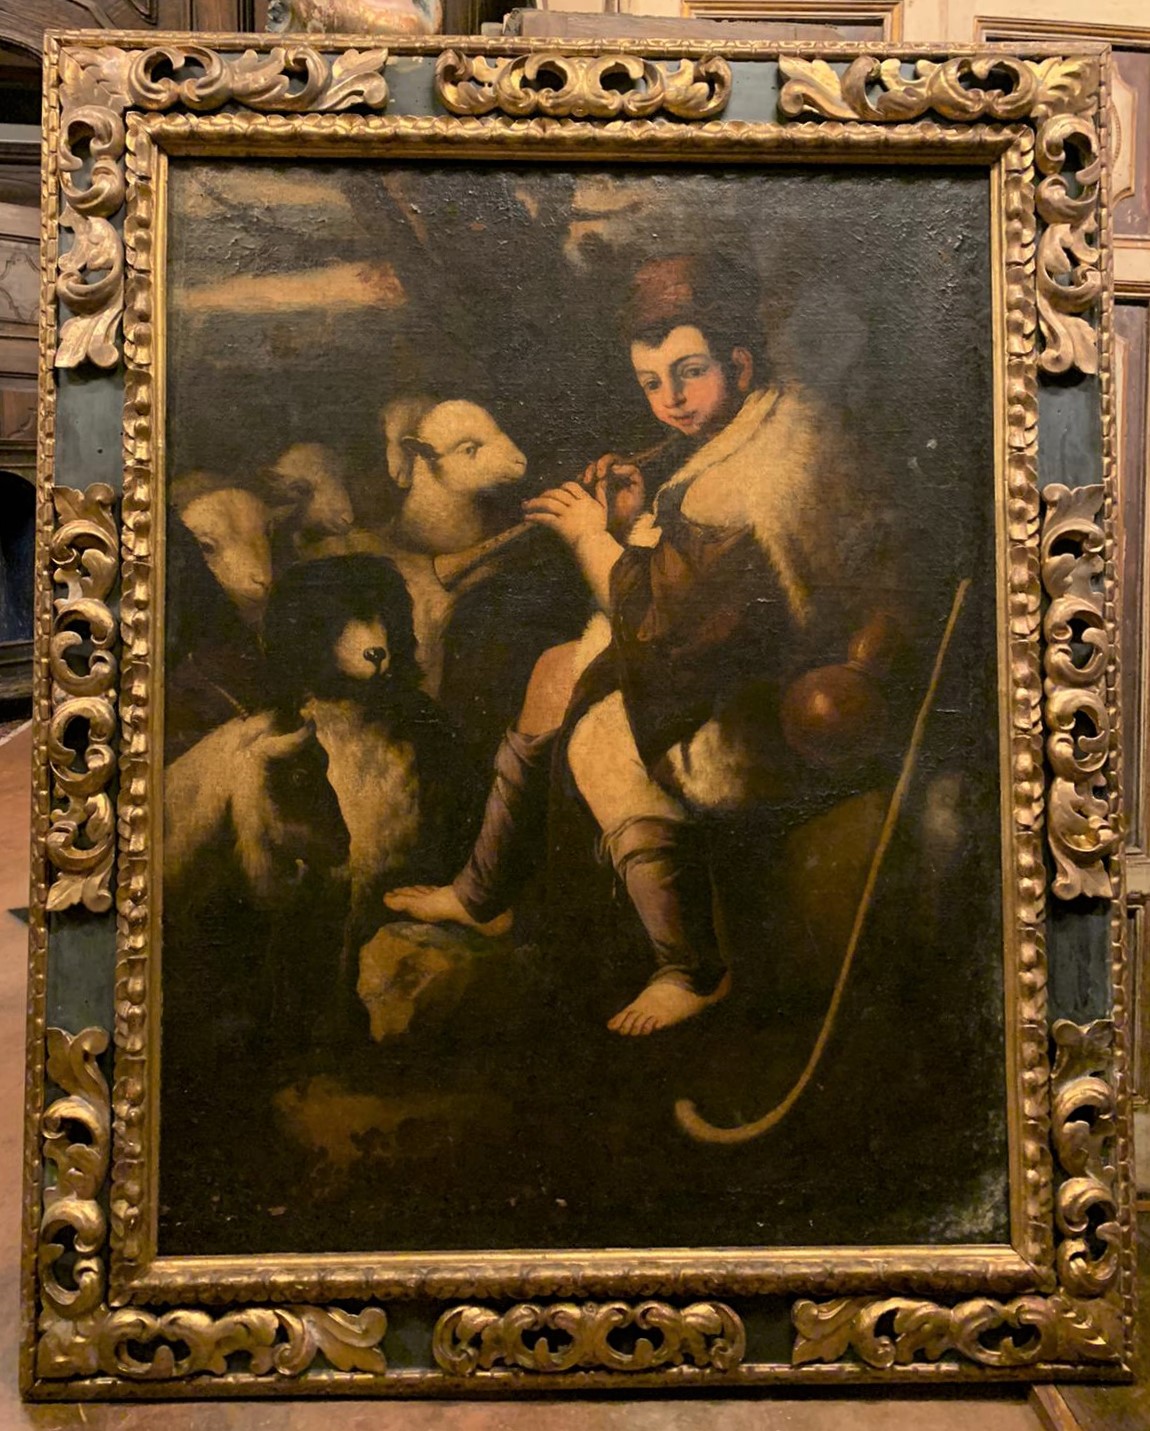 A pan374 - Oil painting on canvas, 17th century, size cm W 150 x H 185